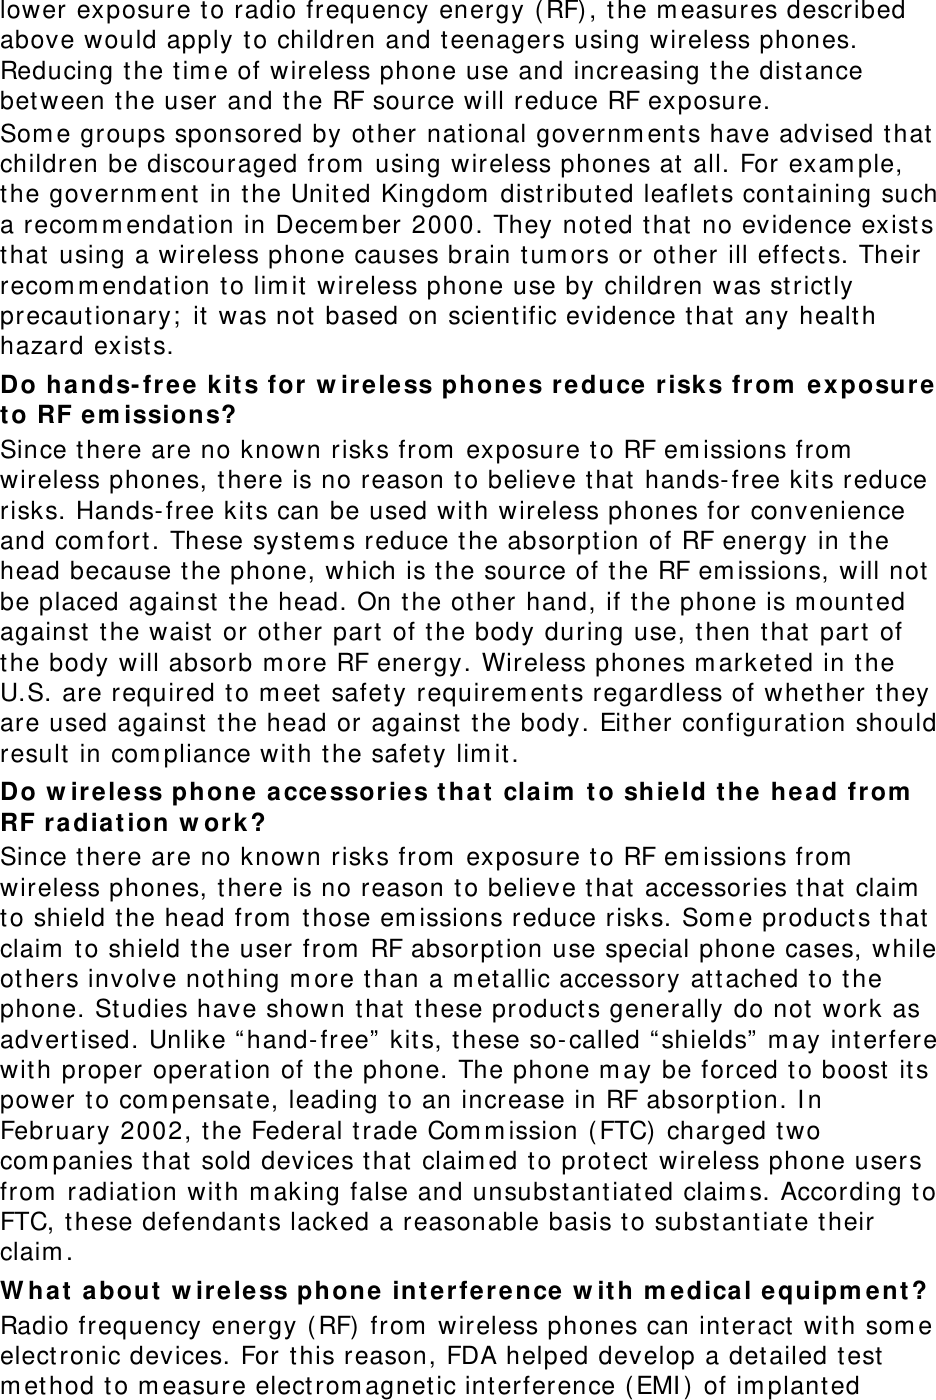 lower exposure to radio frequency energy (RF), the measures described above would apply to children and teenagers using wireless phones. Reducing the time of wireless phone use and increasing the distance between the user and the RF source will reduce RF exposure. Some groups sponsored by other national governments have advised that children be discouraged from using wireless phones at all. For example, the government in the United Kingdom distributed leaflets containing such a recommendation in December 2000. They noted that no evidence exists that using a wireless phone causes brain tumors or other ill effects. Their recommendation to limit wireless phone use by children was strictly precautionary; it was not based on scientific evidence that any health hazard exists.  Do hands-free kits for wireless phones reduce risks from exposure to RF emissions? Since there are no known risks from exposure to RF emissions from wireless phones, there is no reason to believe that hands-free kits reduce risks. Hands-free kits can be used with wireless phones for convenience and comfort. These systems reduce the absorption of RF energy in the head because the phone, which is the source of the RF emissions, will not be placed against the head. On the other hand, if the phone is mounted against the waist or other part of the body during use, then that part of the body will absorb more RF energy. Wireless phones marketed in the U.S. are required to meet safety requirements regardless of whether they are used against the head or against the body. Either configuration should result in compliance with the safety limit. Do wireless phone accessories that claim to shield the head from RF radiation work? Since there are no known risks from exposure to RF emissions from wireless phones, there is no reason to believe that accessories that claim to shield the head from those emissions reduce risks. Some products that claim to shield the user from RF absorption use special phone cases, while others involve nothing more than a metallic accessory attached to the phone. Studies have shown that these products generally do not work as advertised. Unlike “hand-free” kits, these so-called “shields” may interfere with proper operation of the phone. The phone may be forced to boost its power to compensate, leading to an increase in RF absorption. In February 2002, the Federal trade Commission (FTC) charged two companies that sold devices that claimed to protect wireless phone users from radiation with making false and unsubstantiated claims. According to FTC, these defendants lacked a reasonable basis to substantiate their claim. What about wireless phone interference with medical equipment? Radio frequency energy (RF) from wireless phones can interact with some electronic devices. For this reason, FDA helped develop a detailed test method to measure electromagnetic interference (EMI) of implanted 